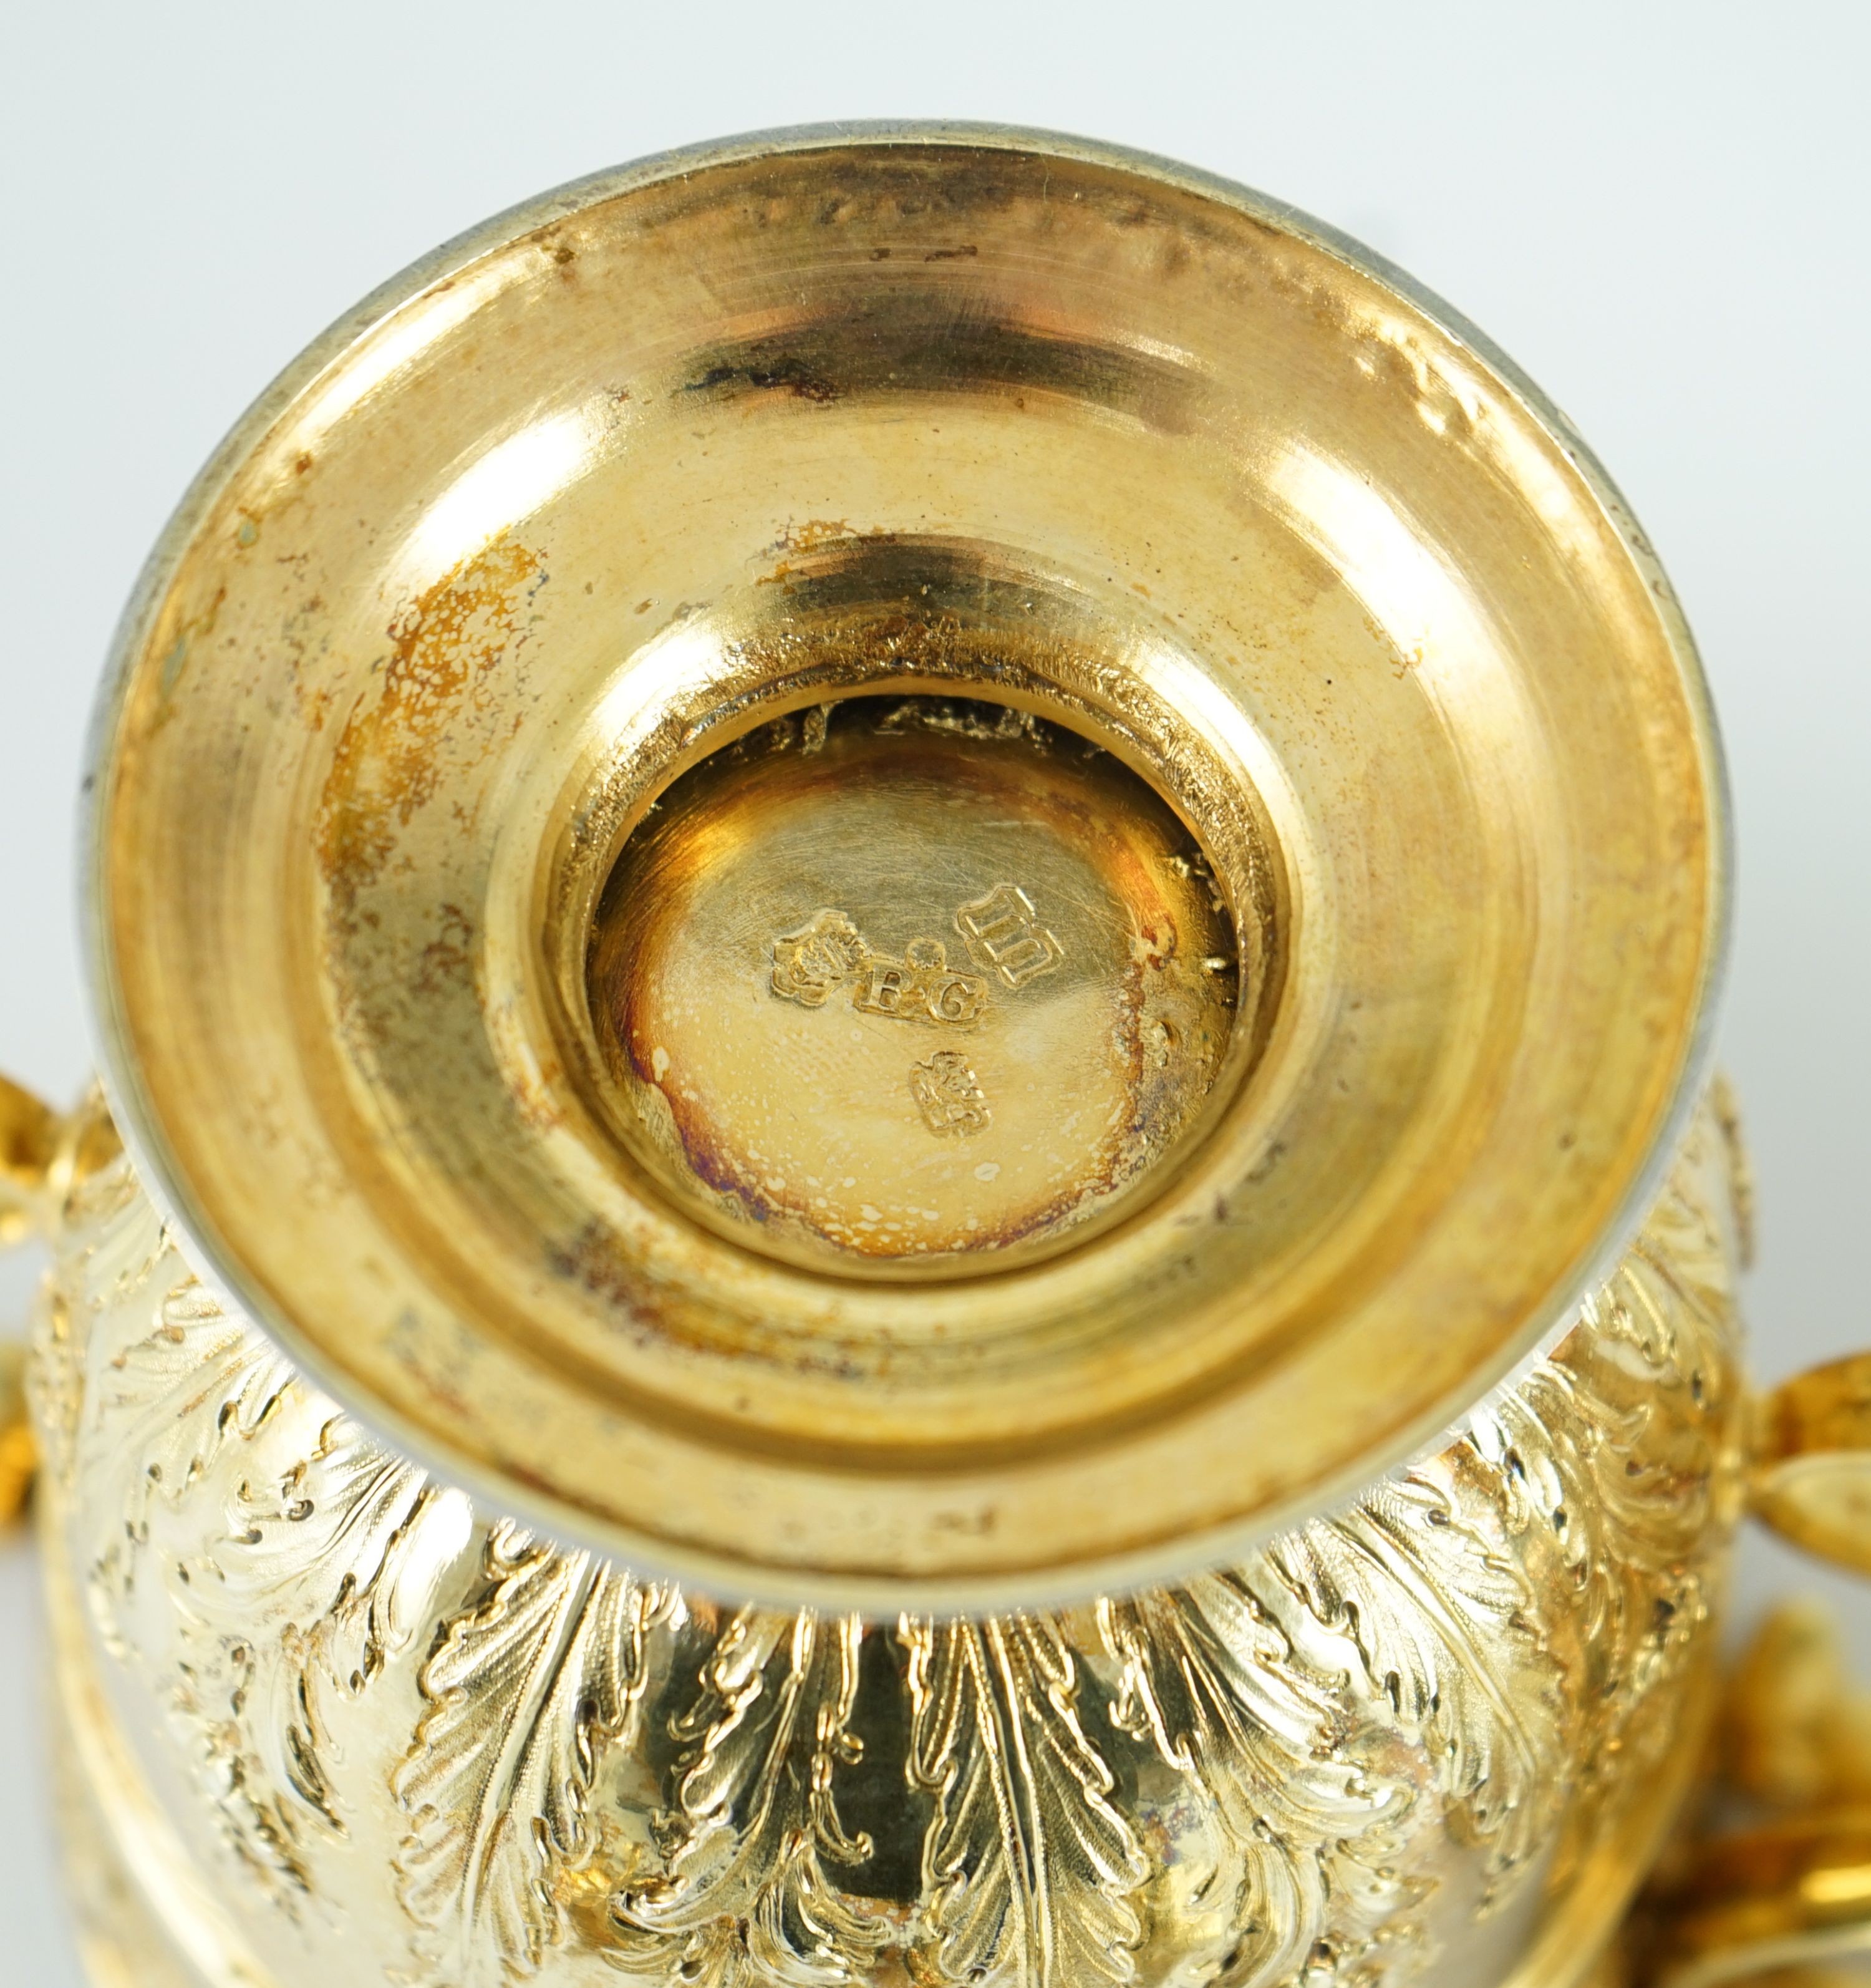 A good pair of George II embossed silver gilt two handled pedestal cups and covers, by Benjamin Gignac